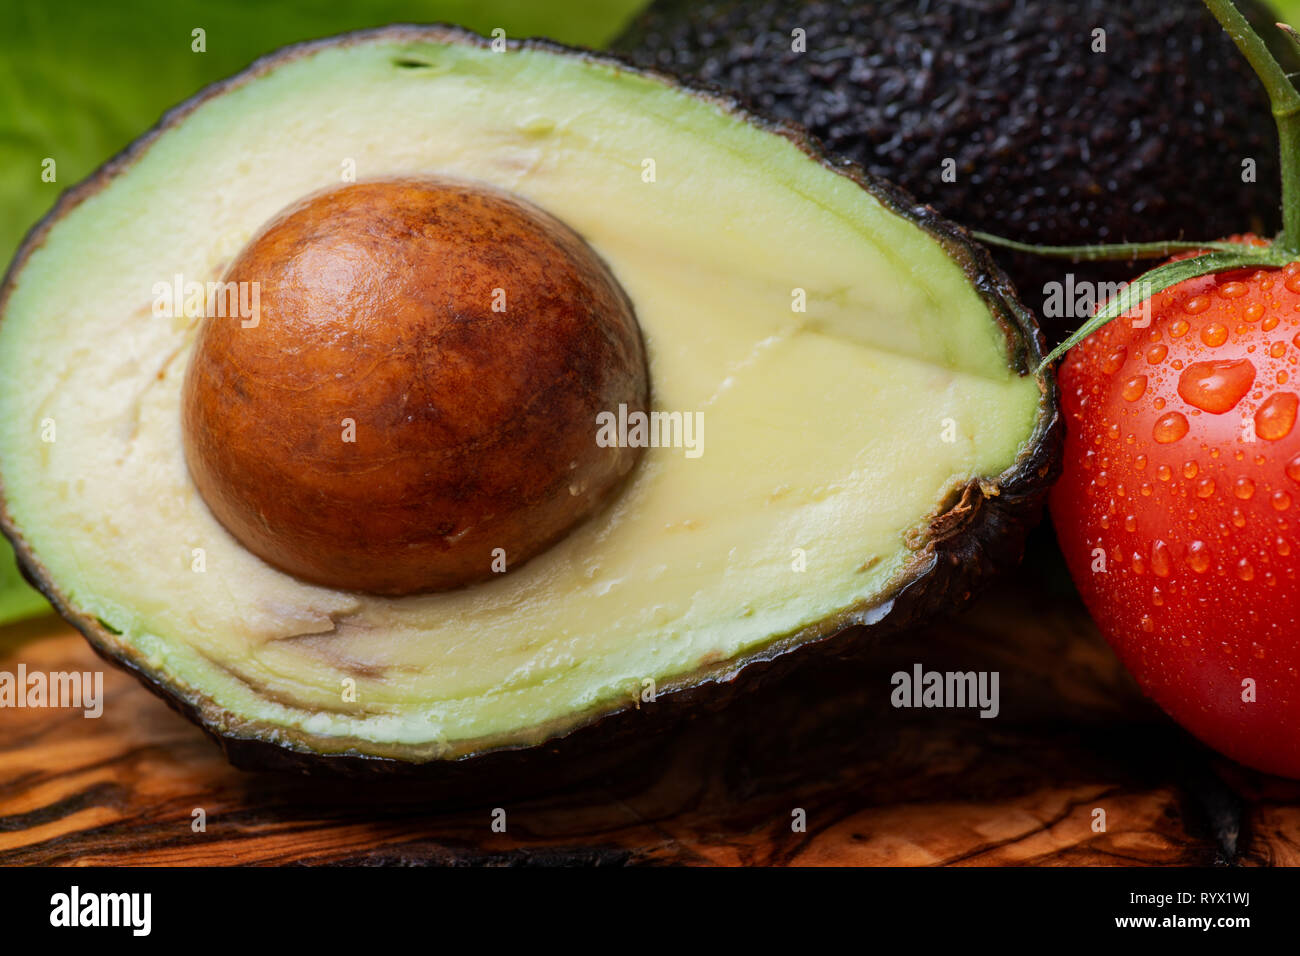 Fresh Organic Avocado Cut In Half And Organic Red Tomatoes On The